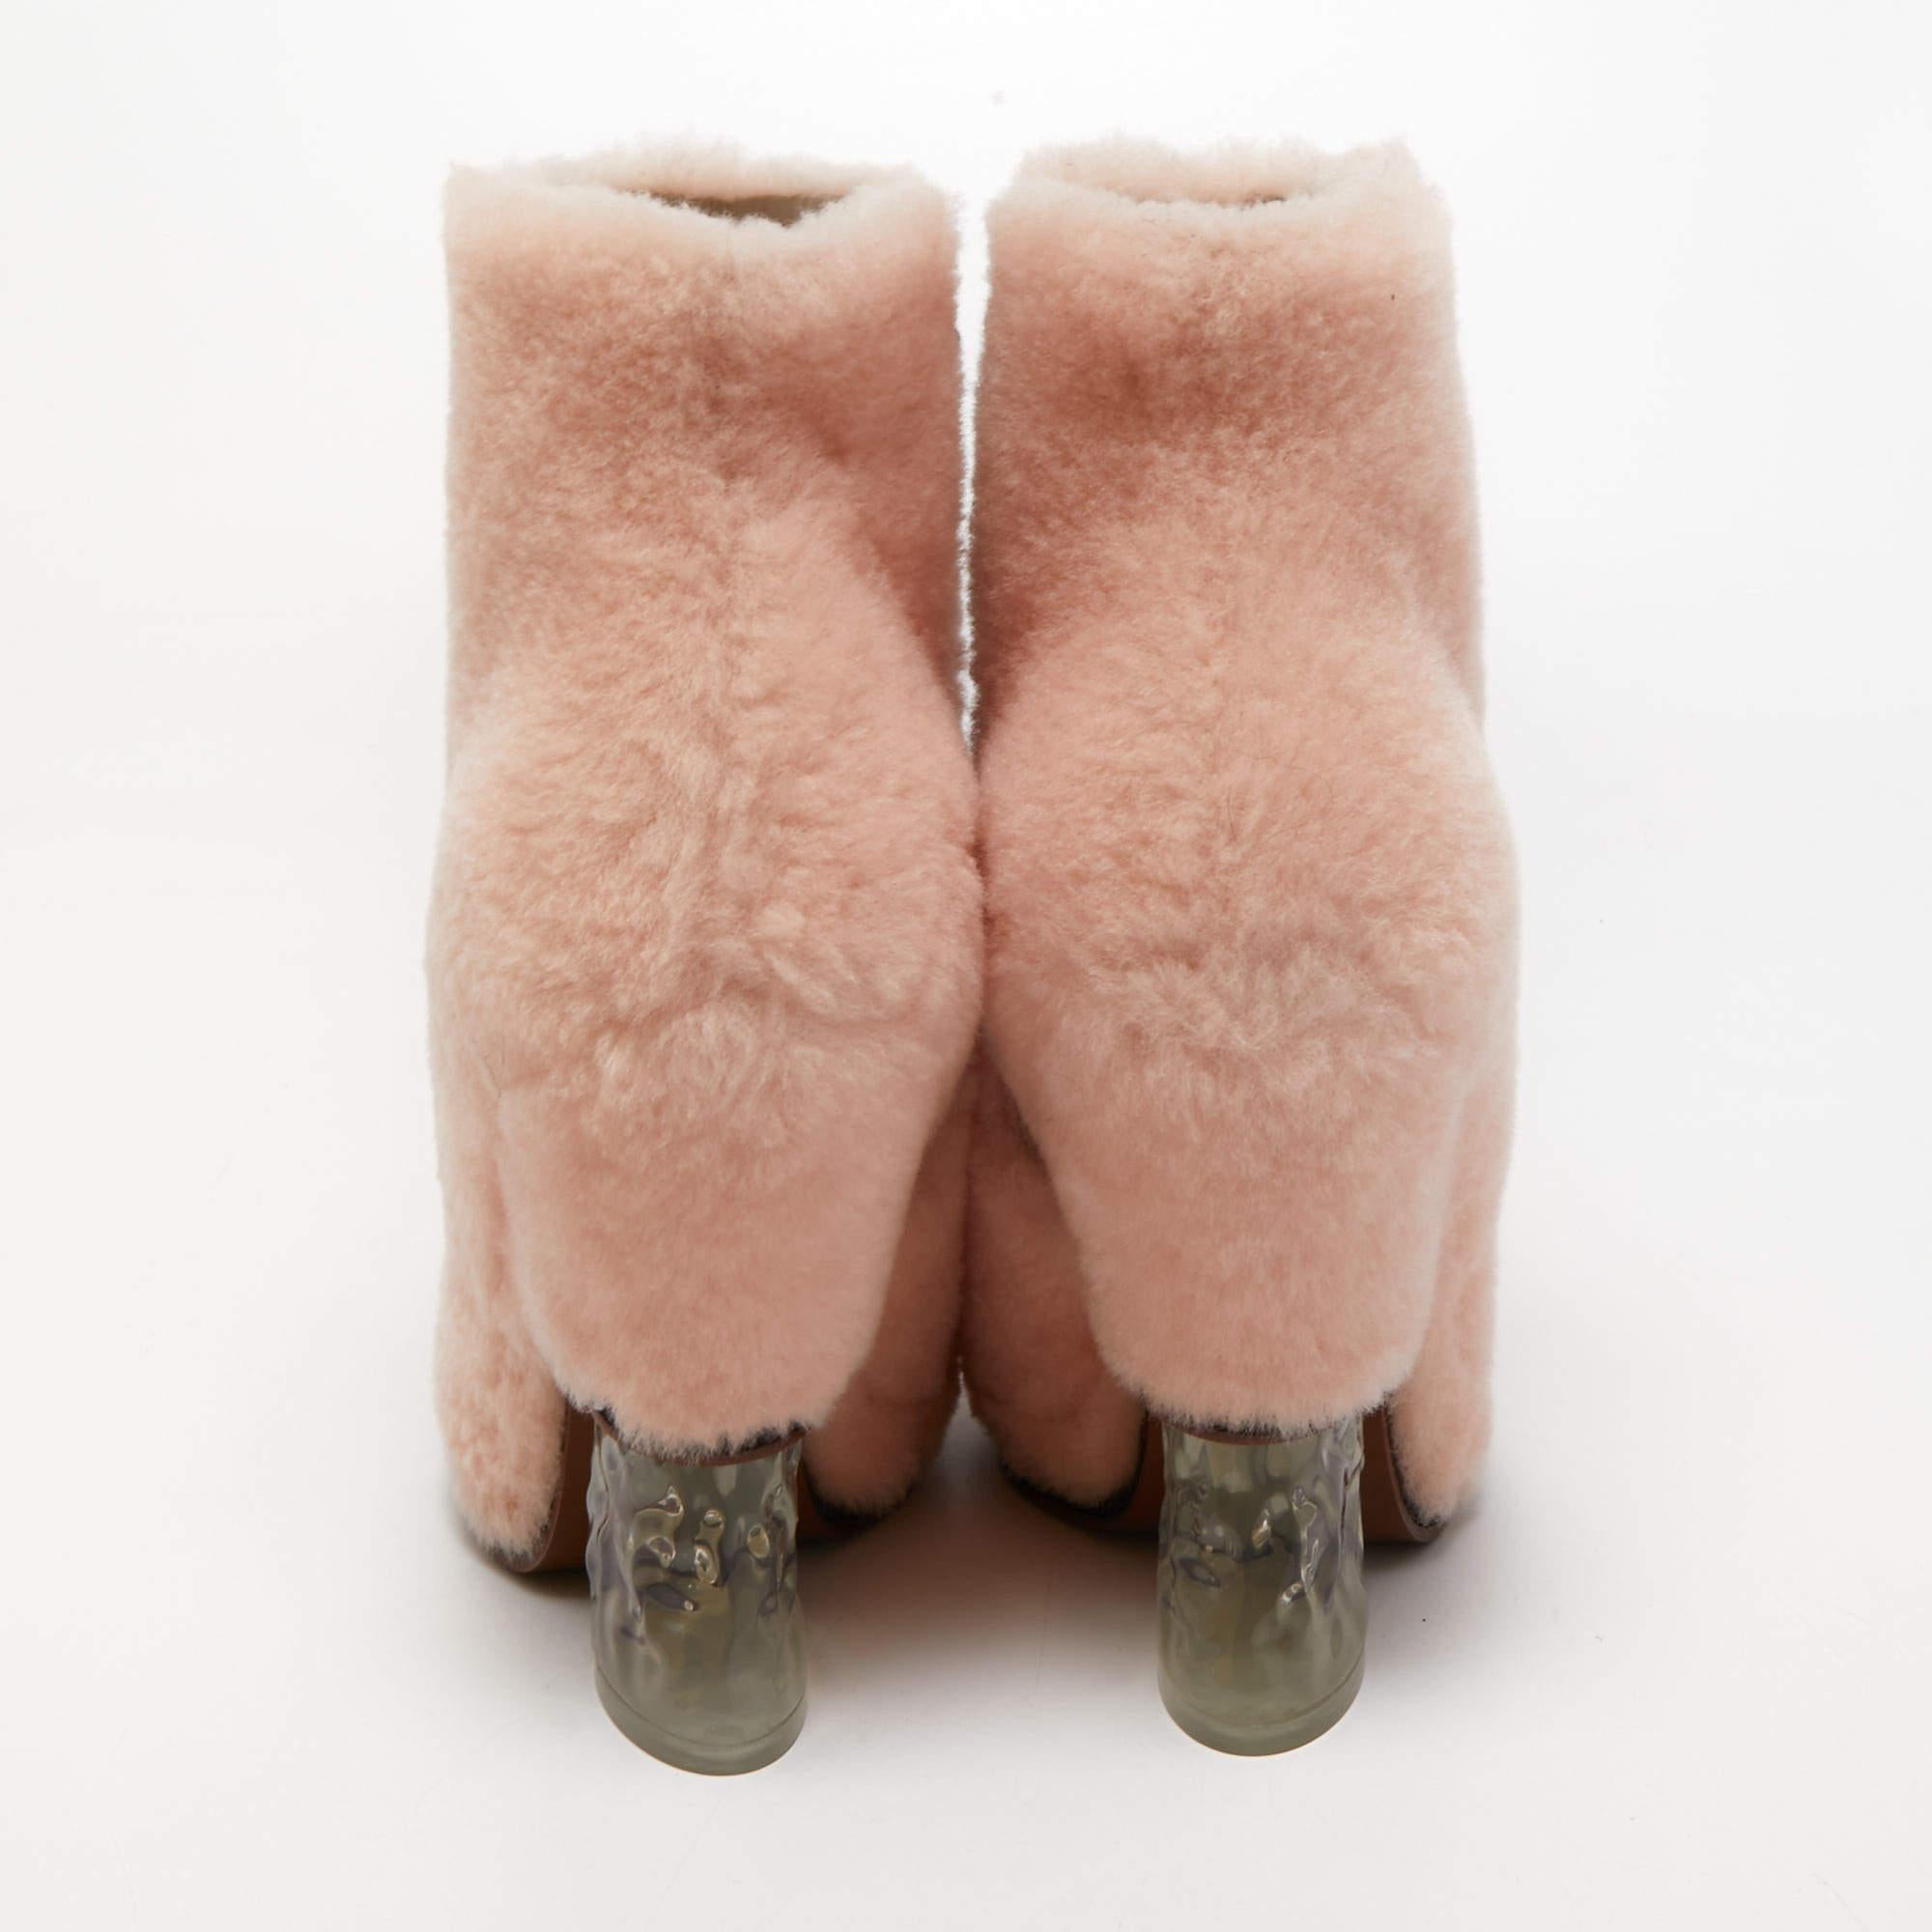 Fendi is all set to impress you with this stunning pair of boots. Crafted from shearling, they feature sturdy heels. This pair of boots will raise your style factor.

Includes: Original Box